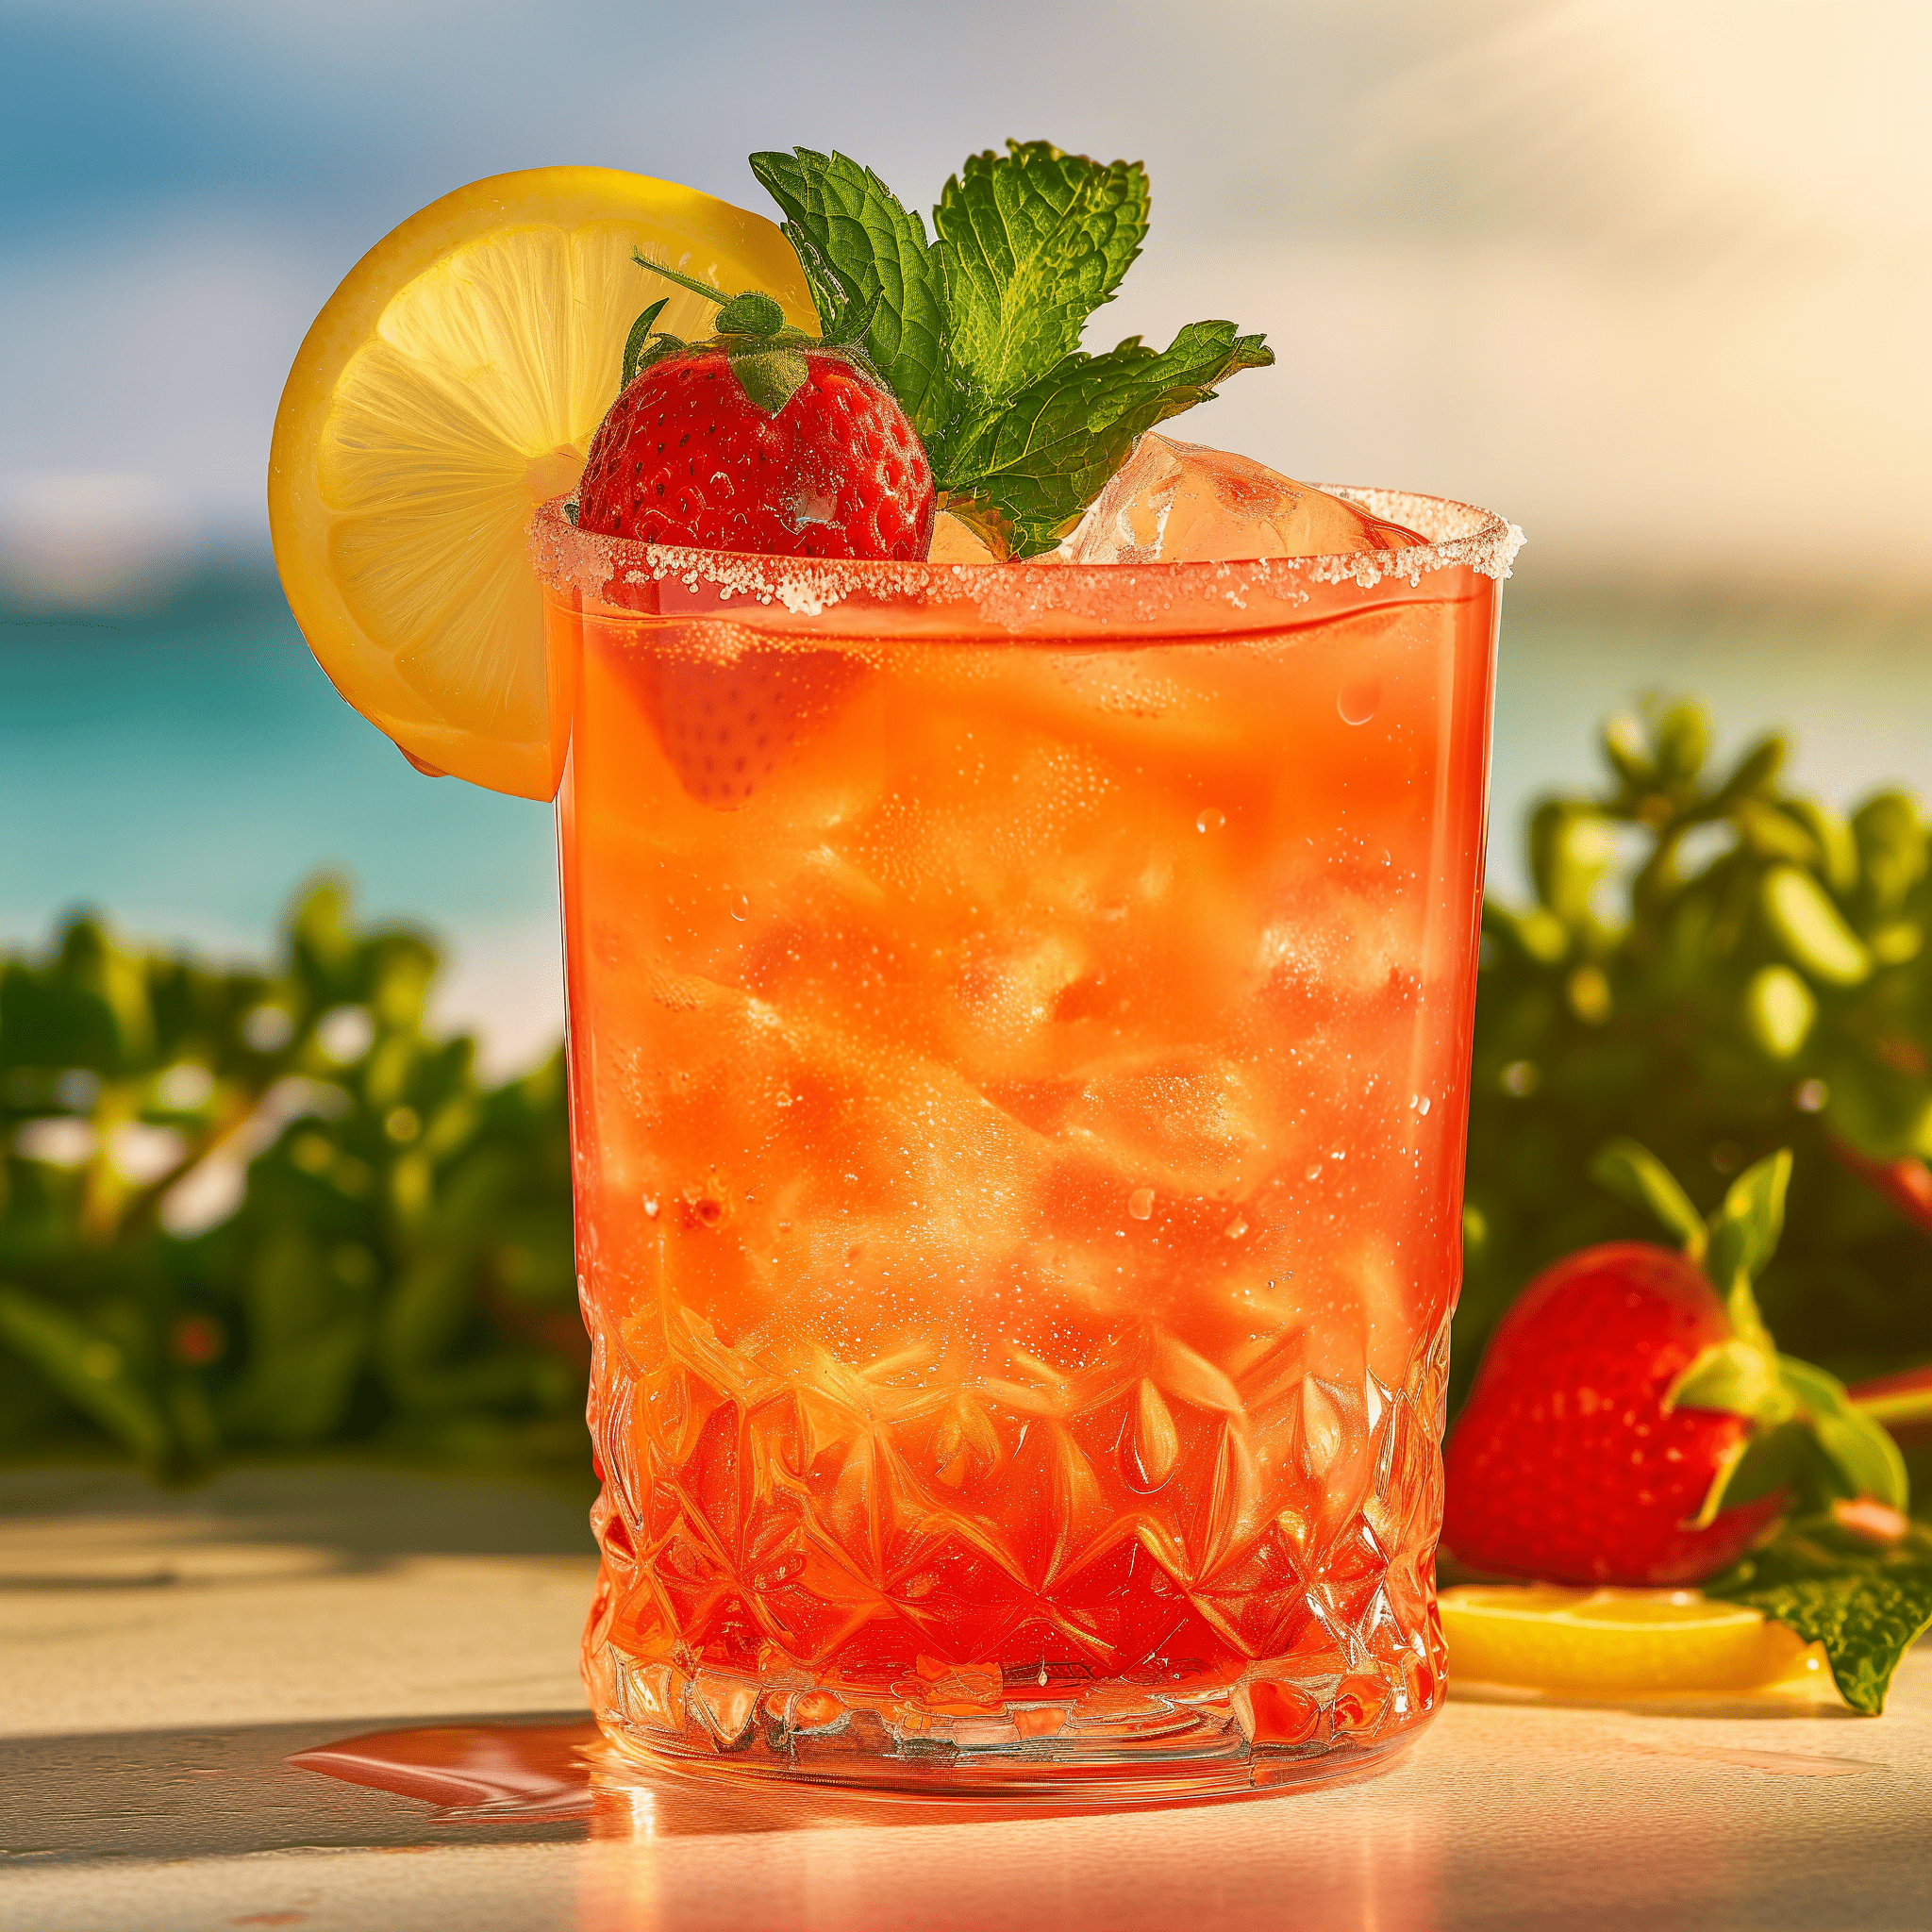 Strawberry Lemonade Cocktail Recipe - The Strawberry Lemonade Cocktail is a harmonious mix of sweet strawberries and zesty lemon, with a subtle hint of mint. It's a light and refreshing drink with a gentle kick from the vodka, perfect for those who enjoy fruity cocktails.